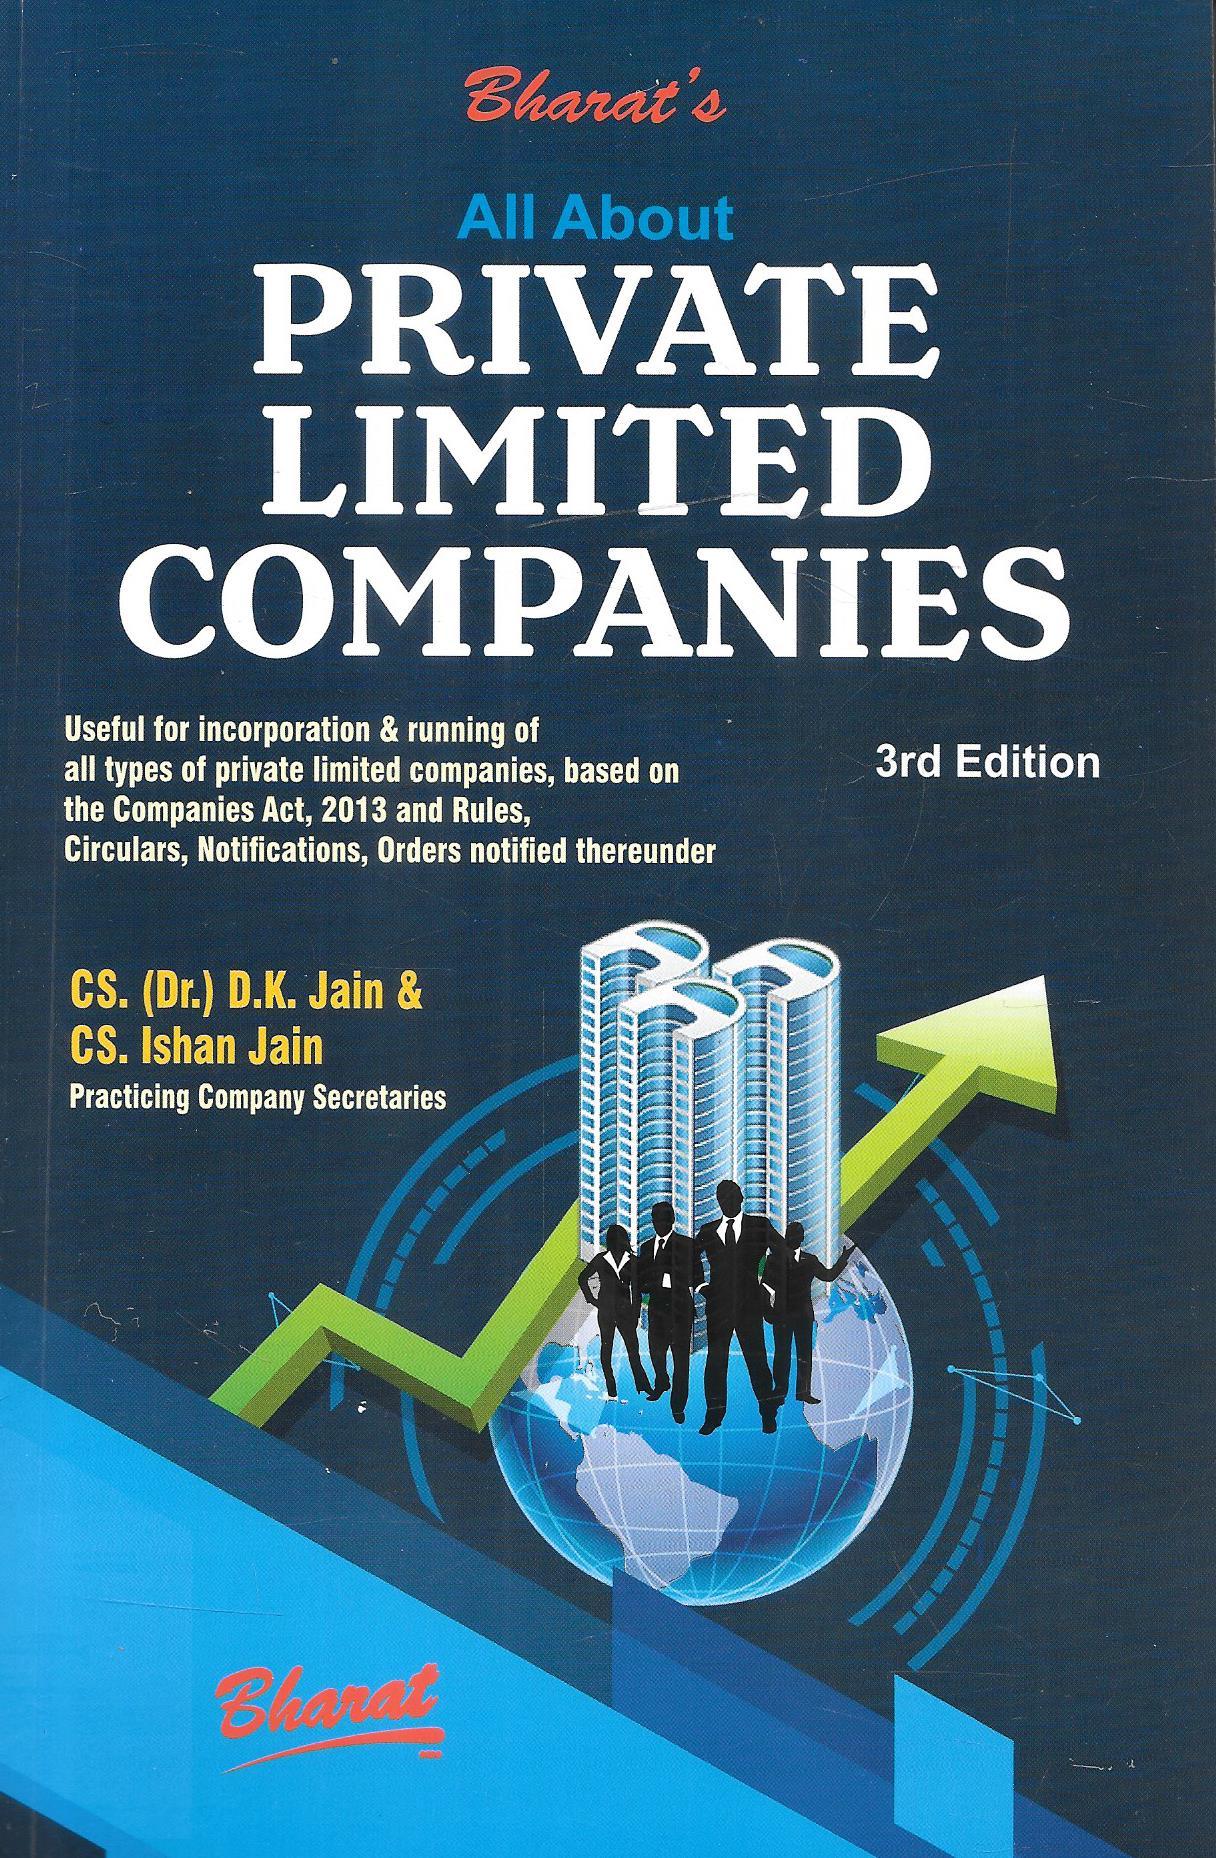 All About Private Limited Companies